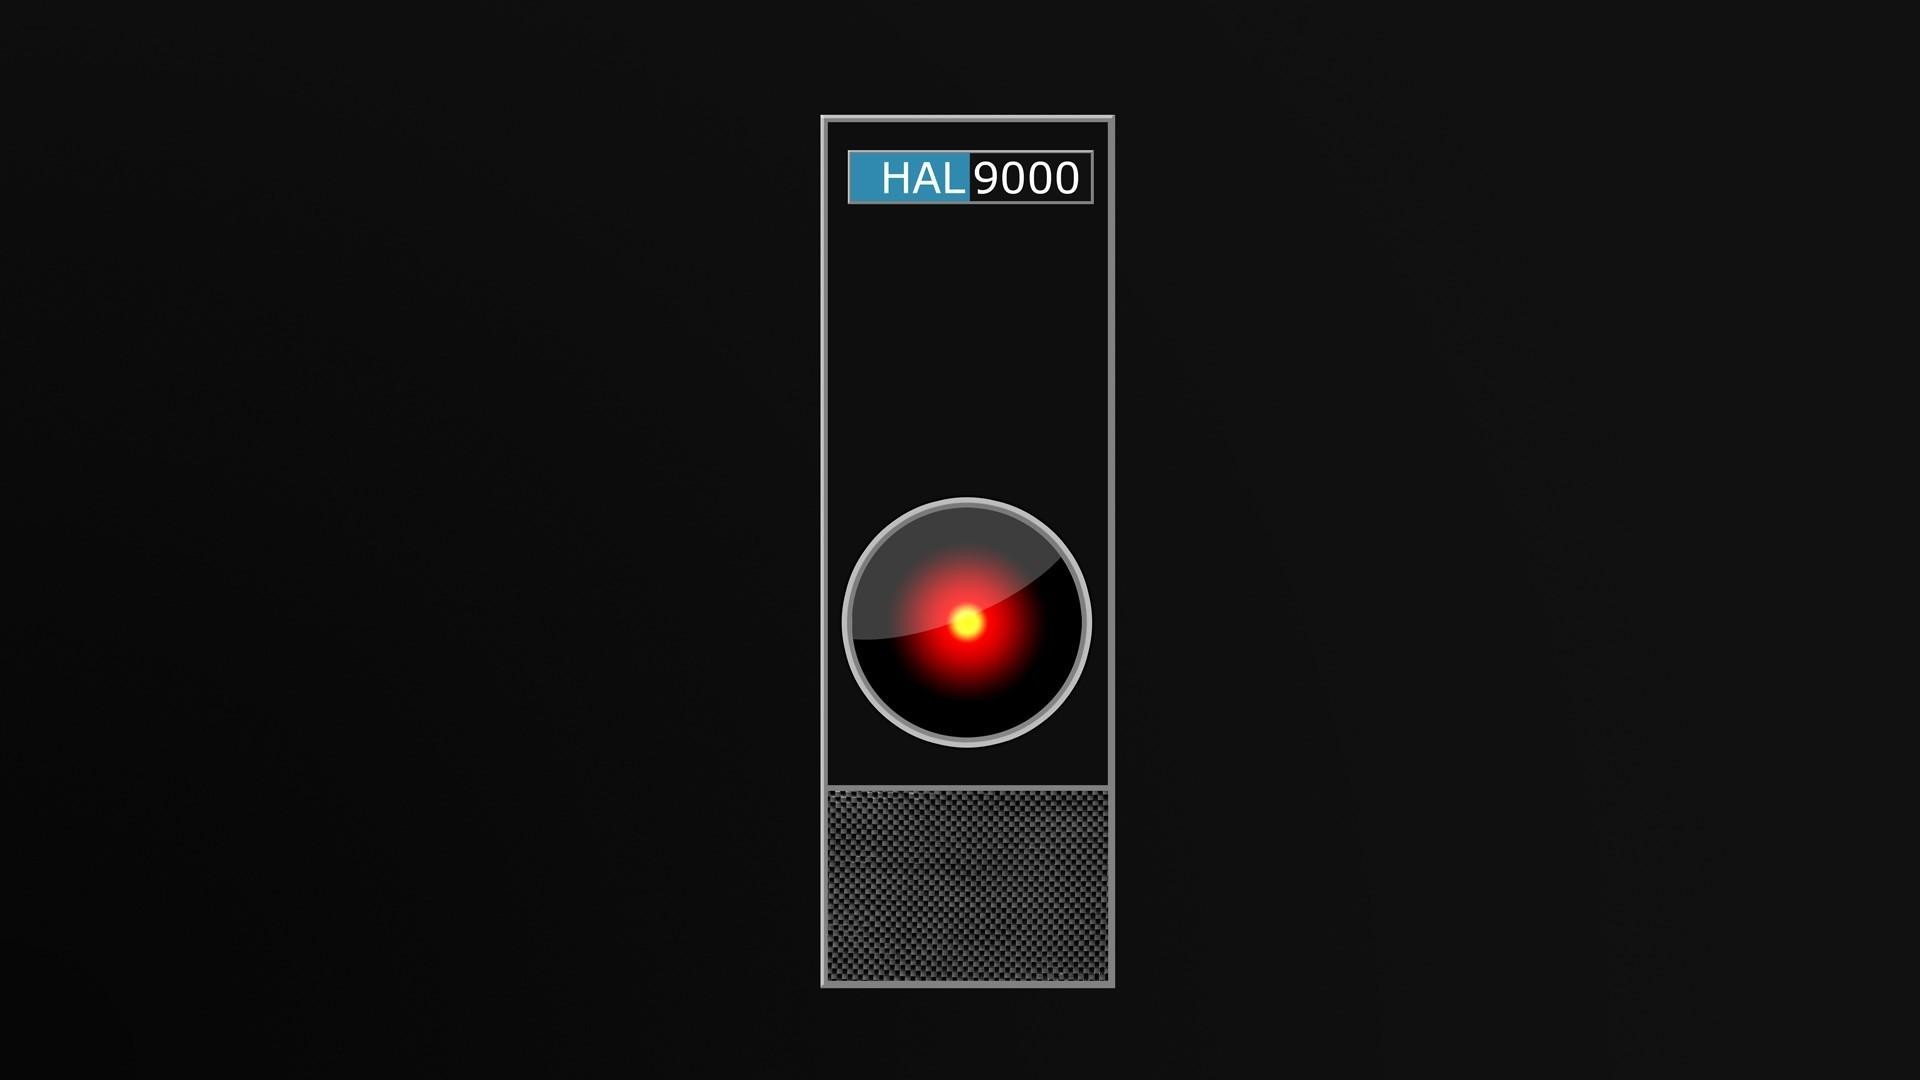 1920x1080 2001: a space odyssey hal9000 logic memory systems wallpaper | (59102)